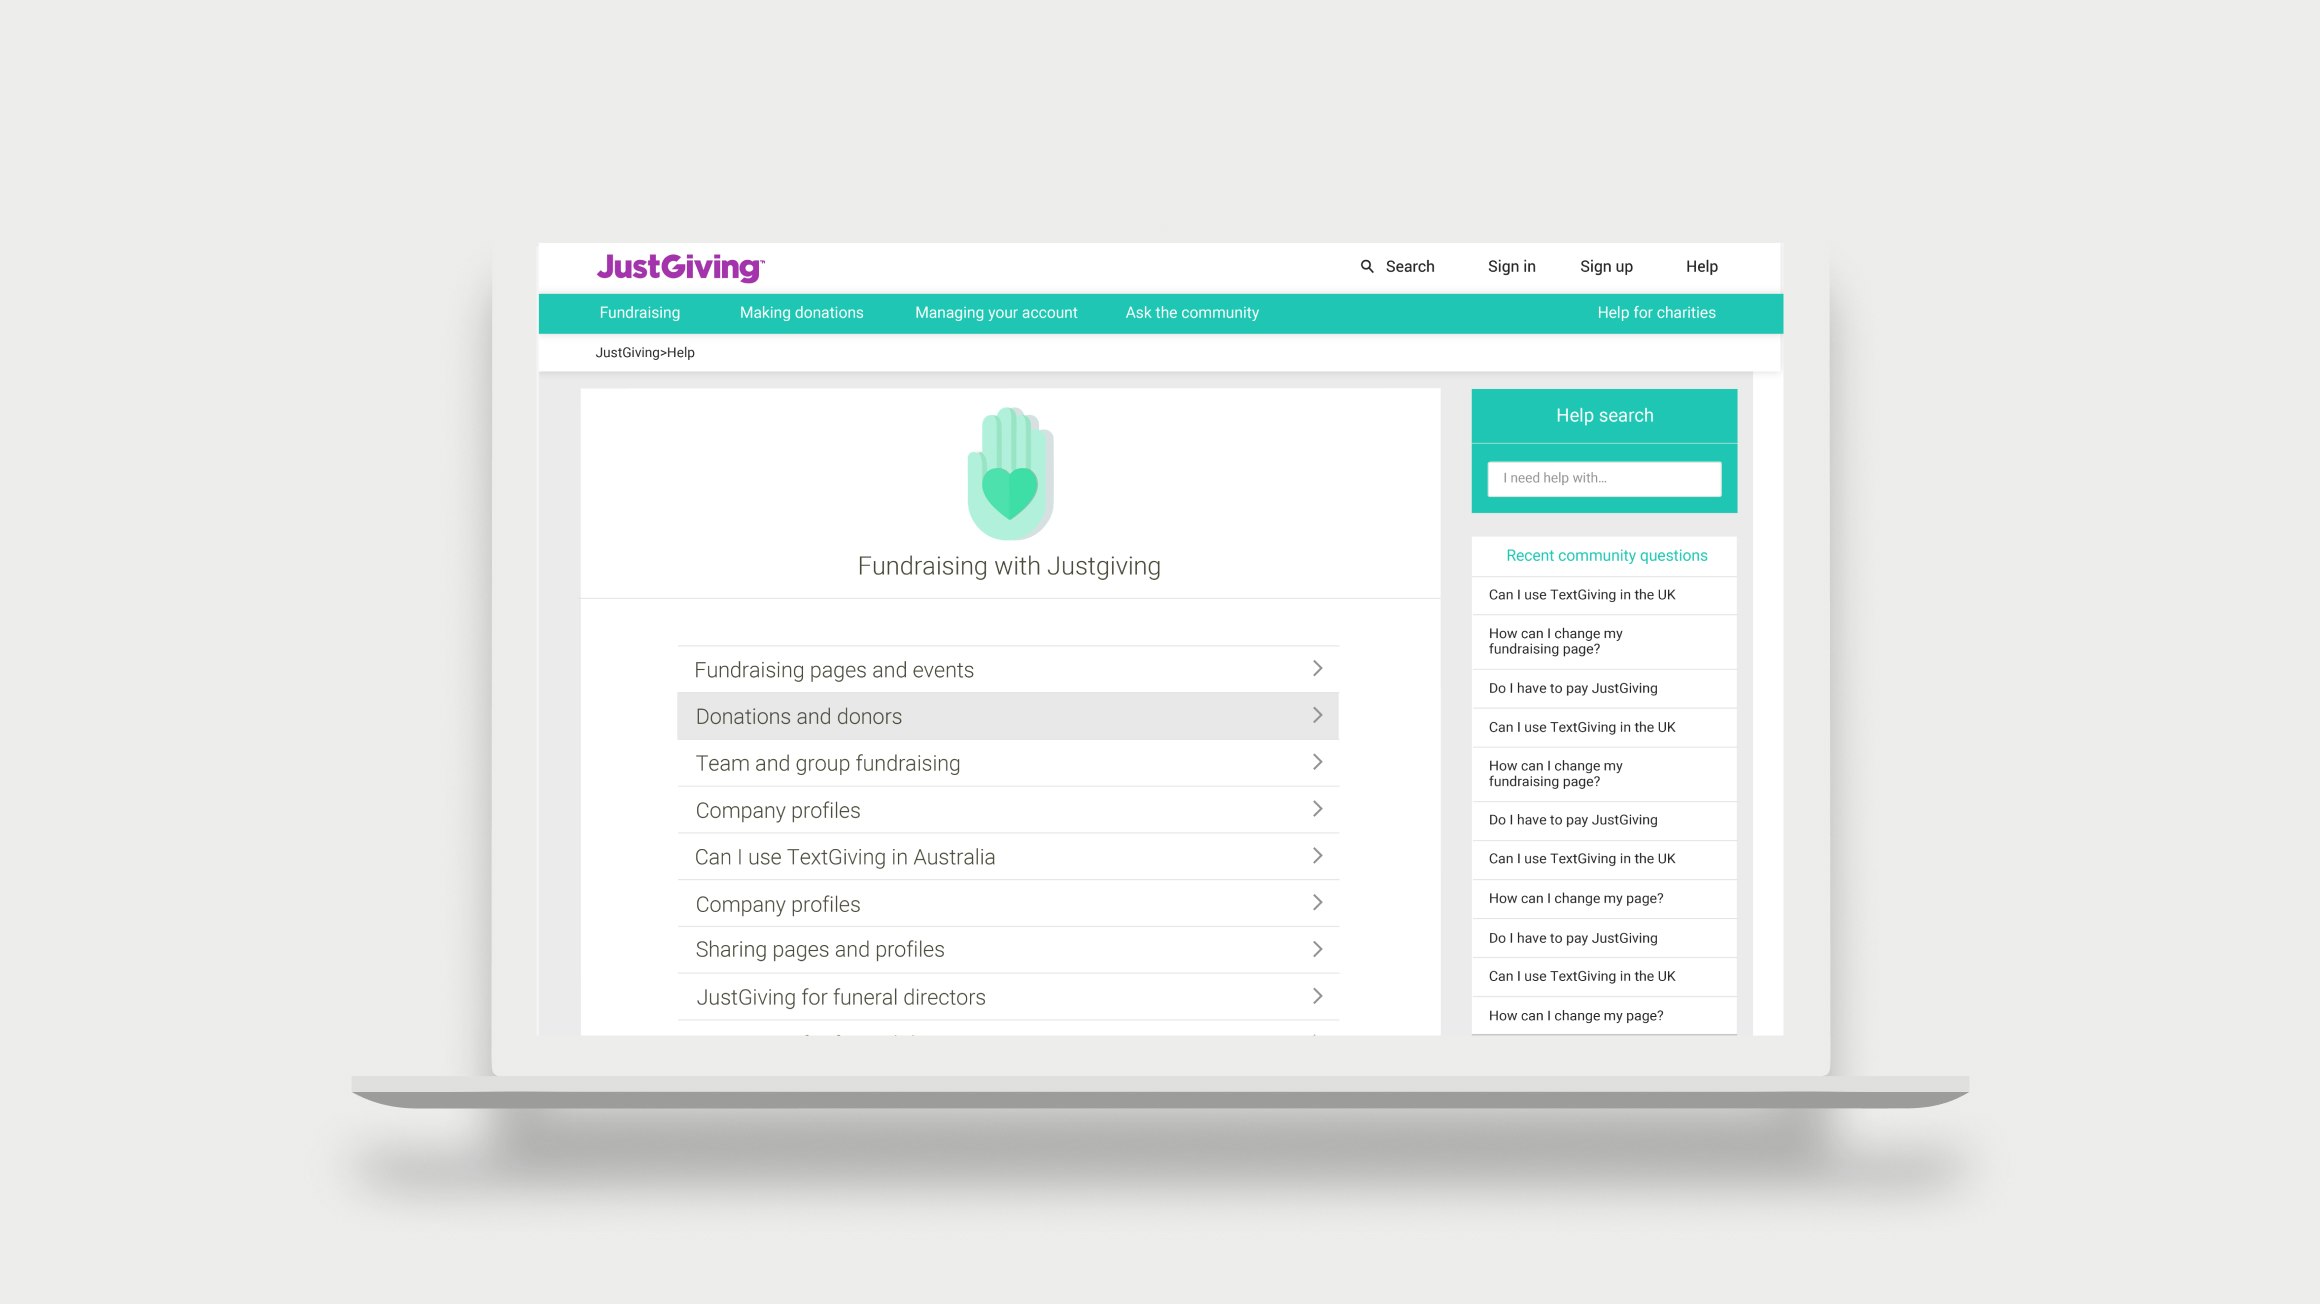 Redesign of Just Giving’s ‘Help and support’ pages